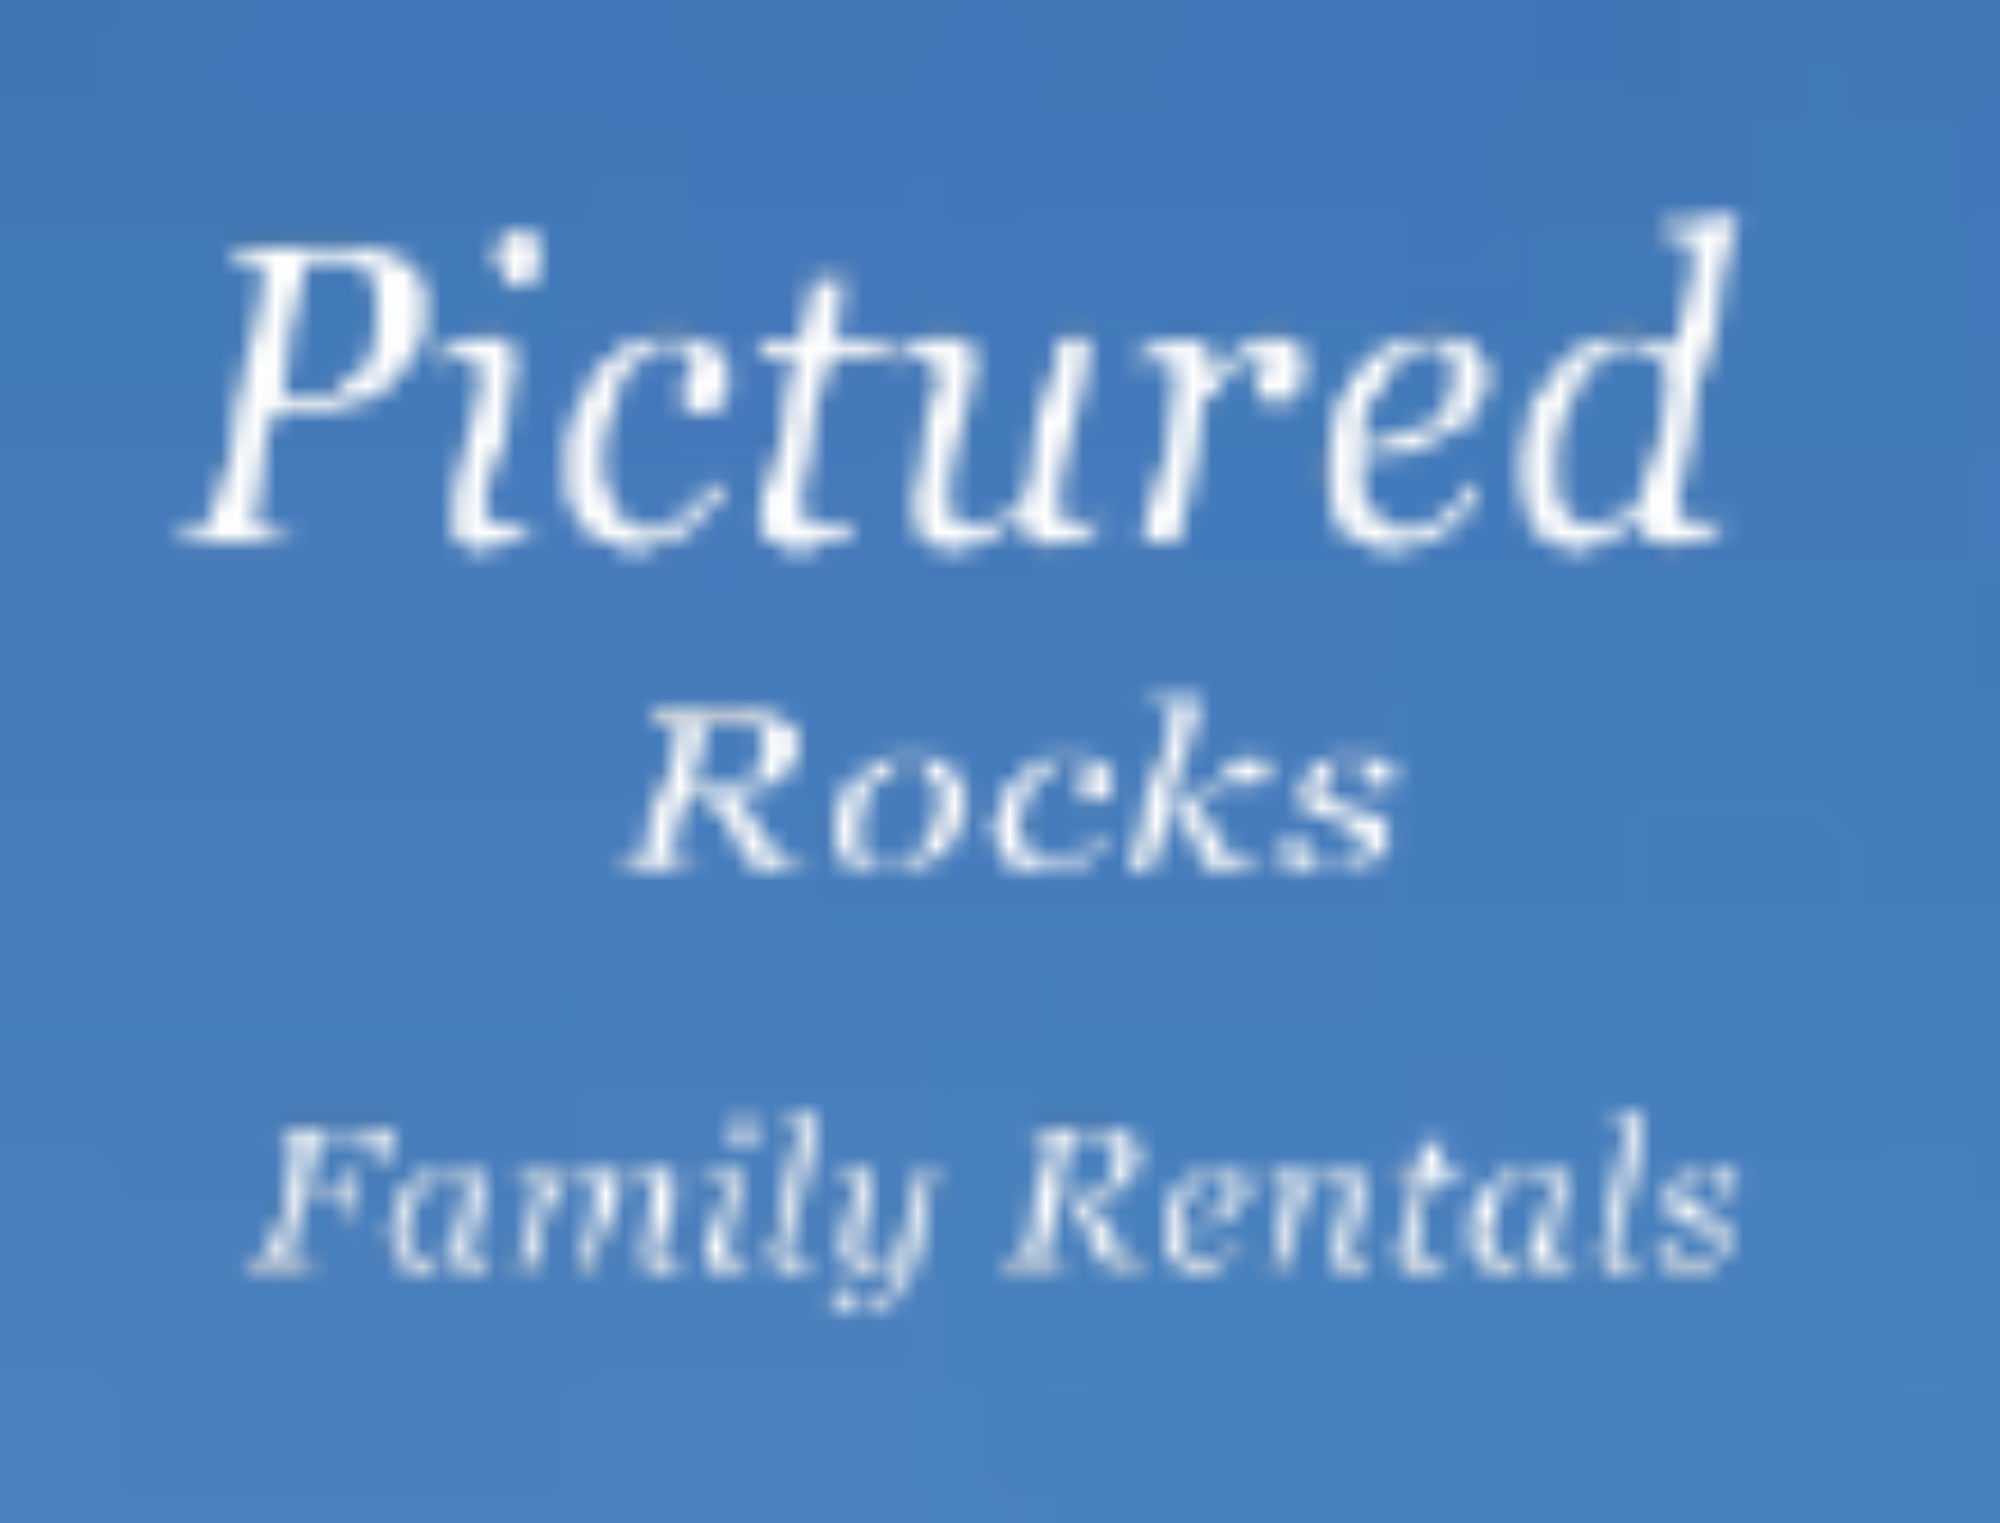 Pictured Rocks Family Rentals